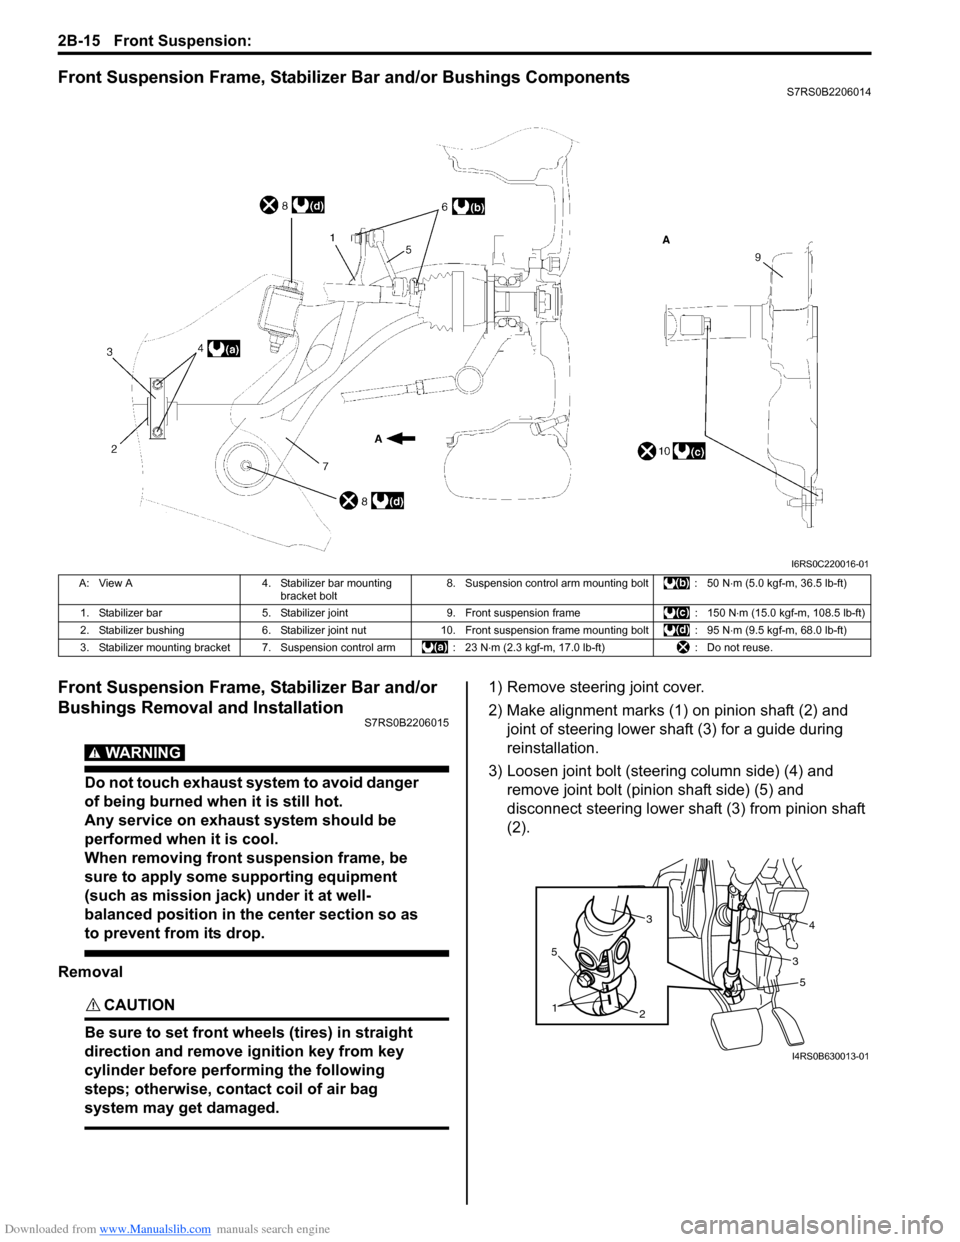 SUZUKI SWIFT 2006 2.G Service User Guide Downloaded from www.Manualslib.com manuals search engine 2B-15 Front Suspension: 
Front Suspension Frame, Stabilizer Bar and/or Bushings ComponentsS7RS0B2206014
Front Suspension Frame, Stabilizer Bar 